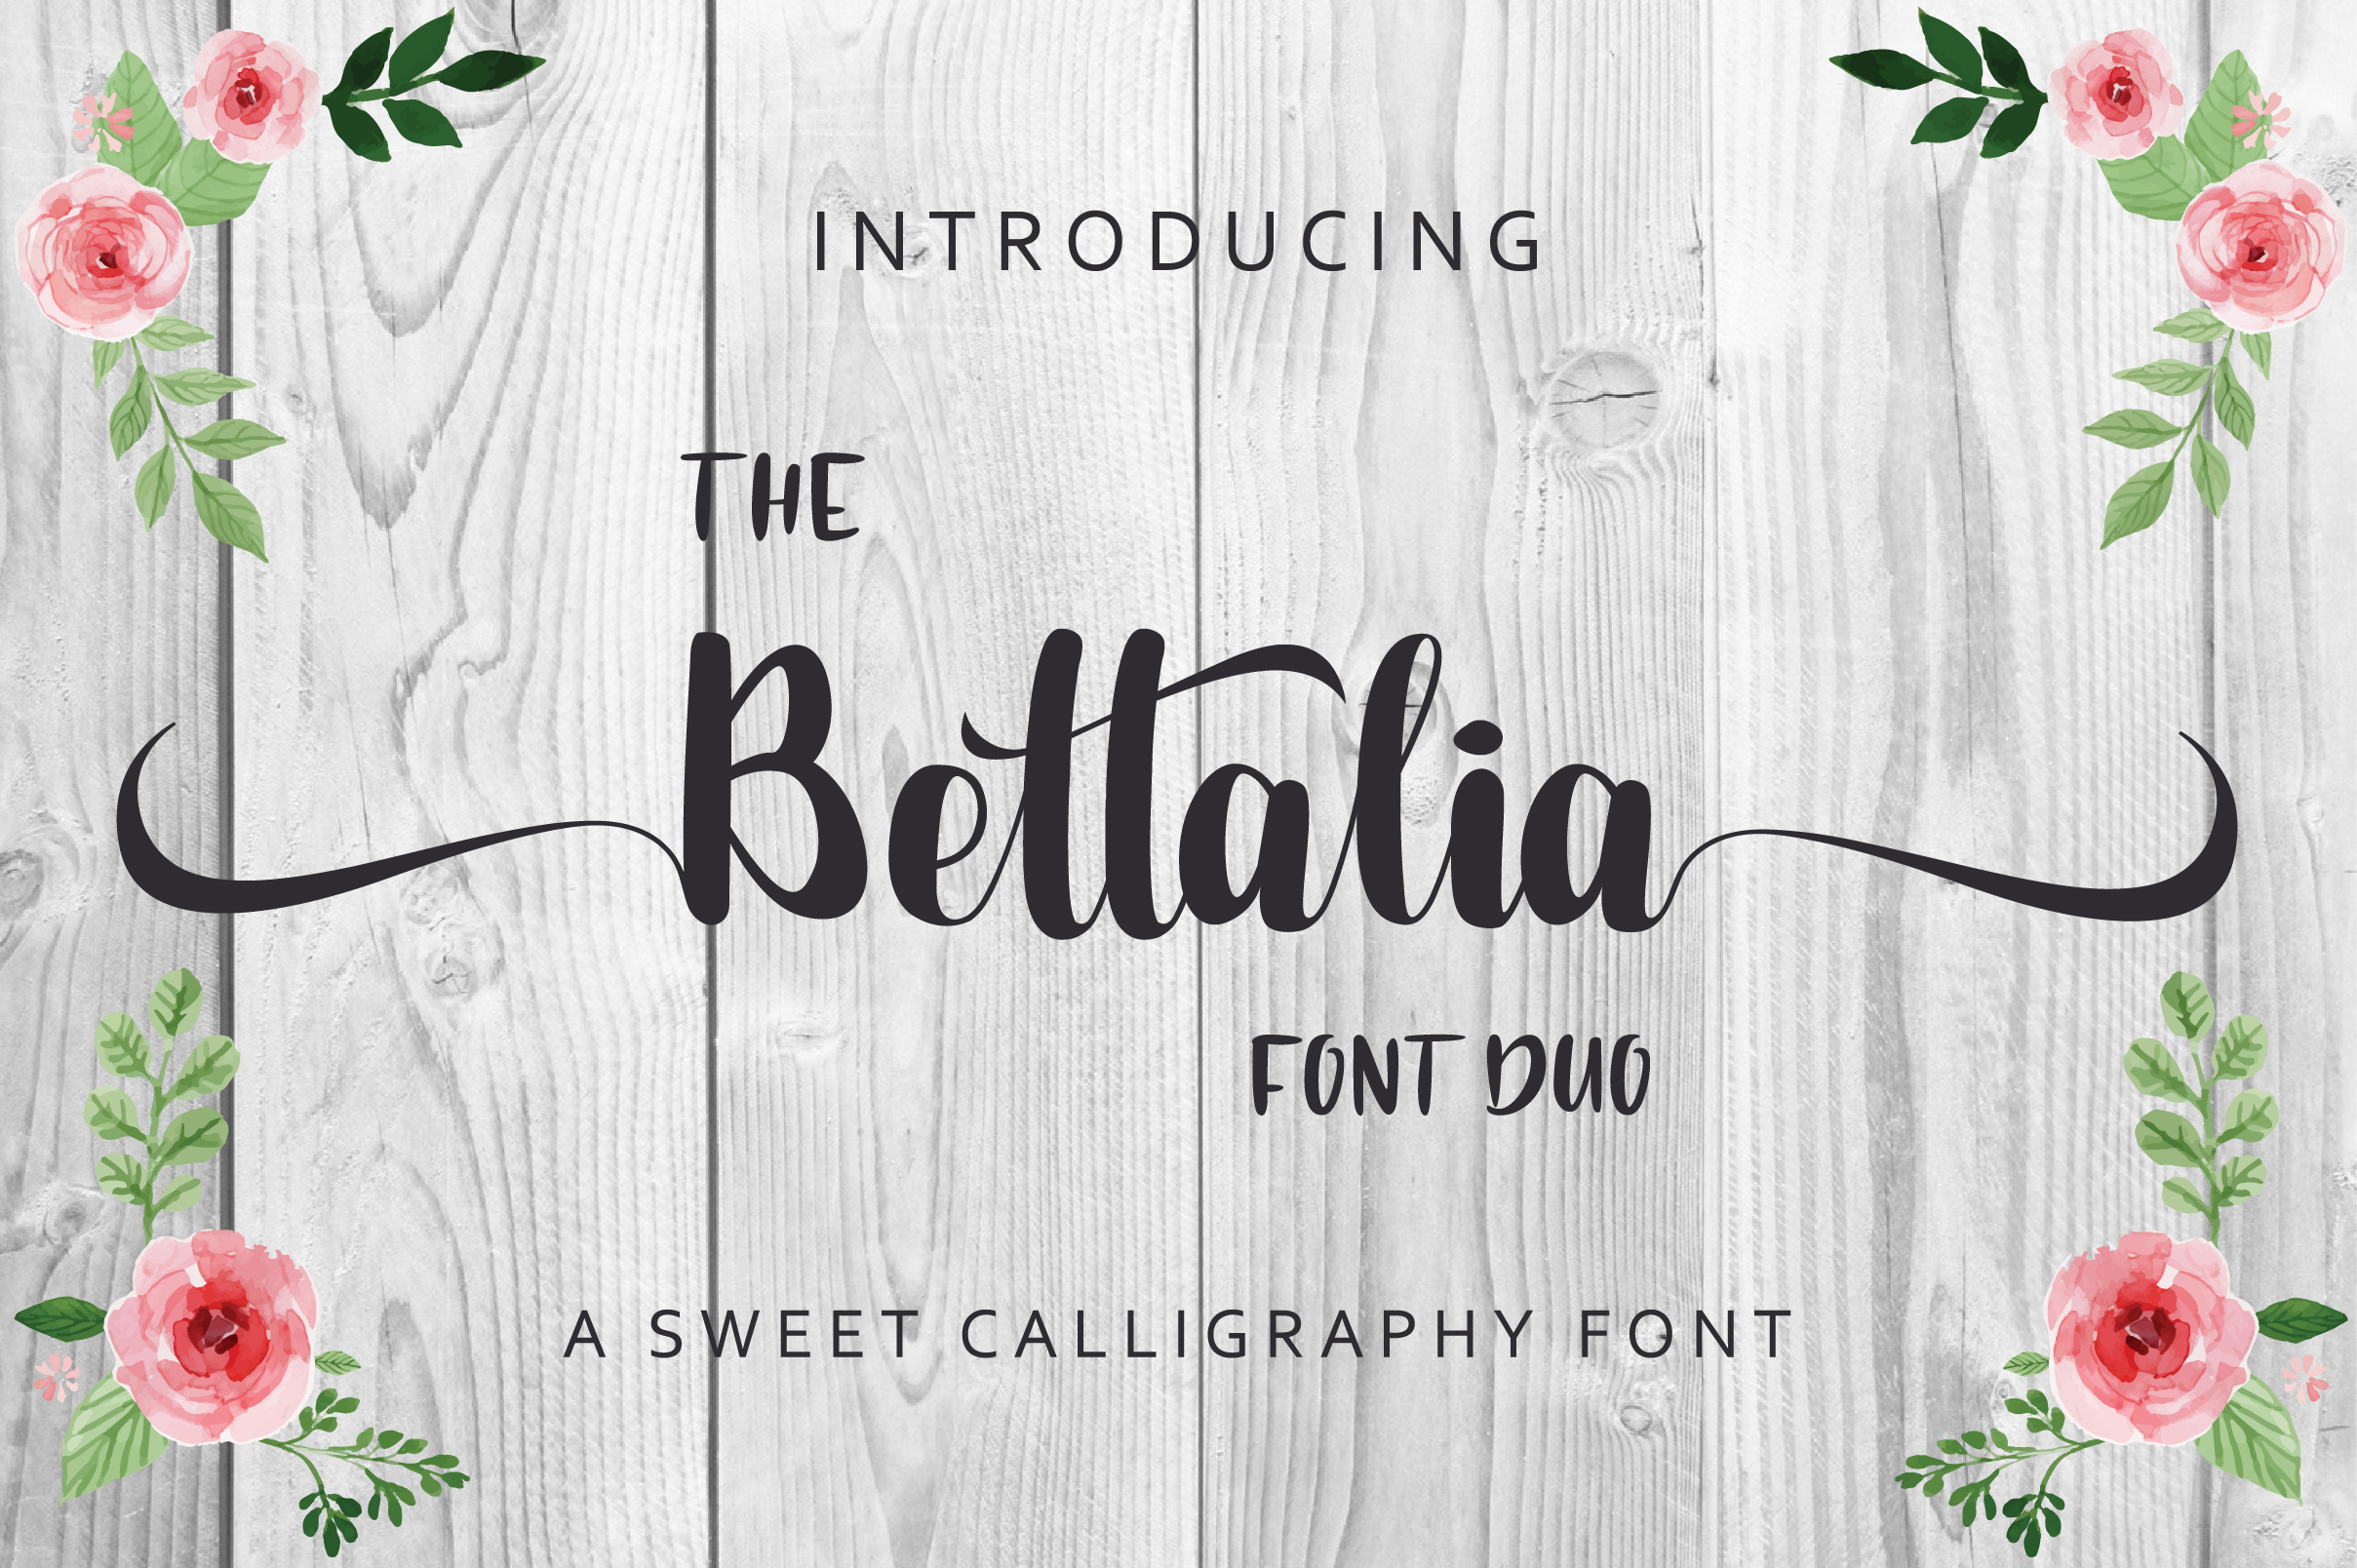 The Bettalia Font Duo插图1